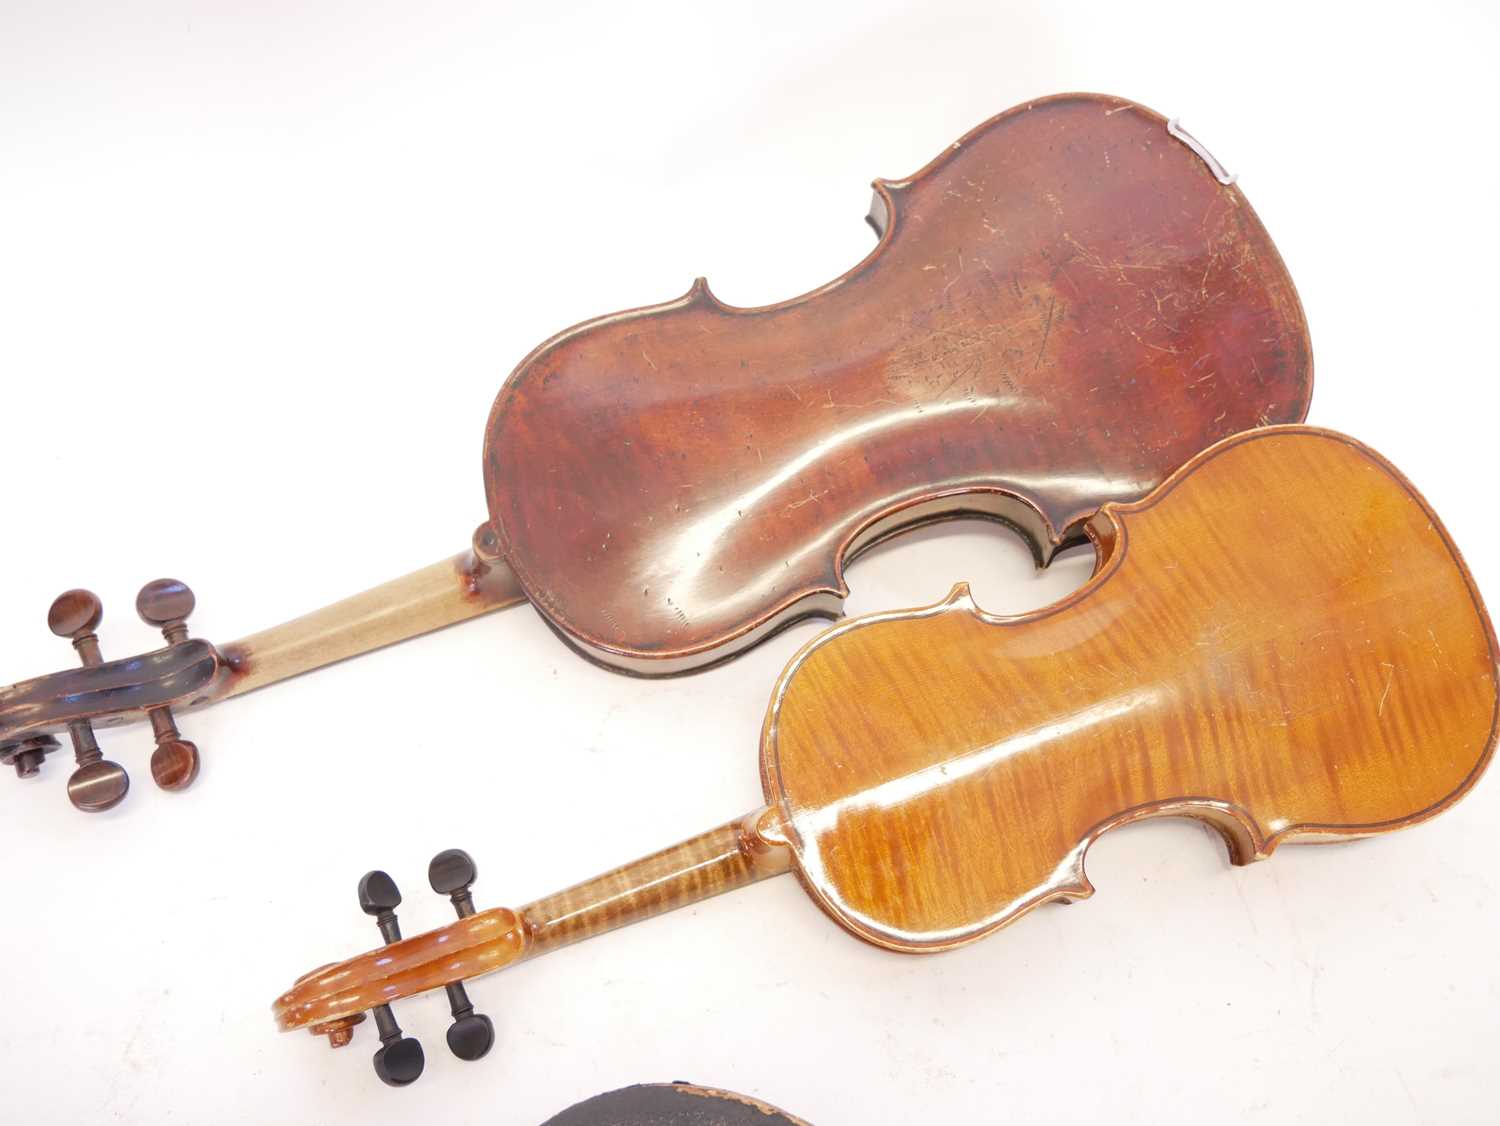 4/4 violin and a 1/2 size violin, each with a bow and case. - Image 2 of 7